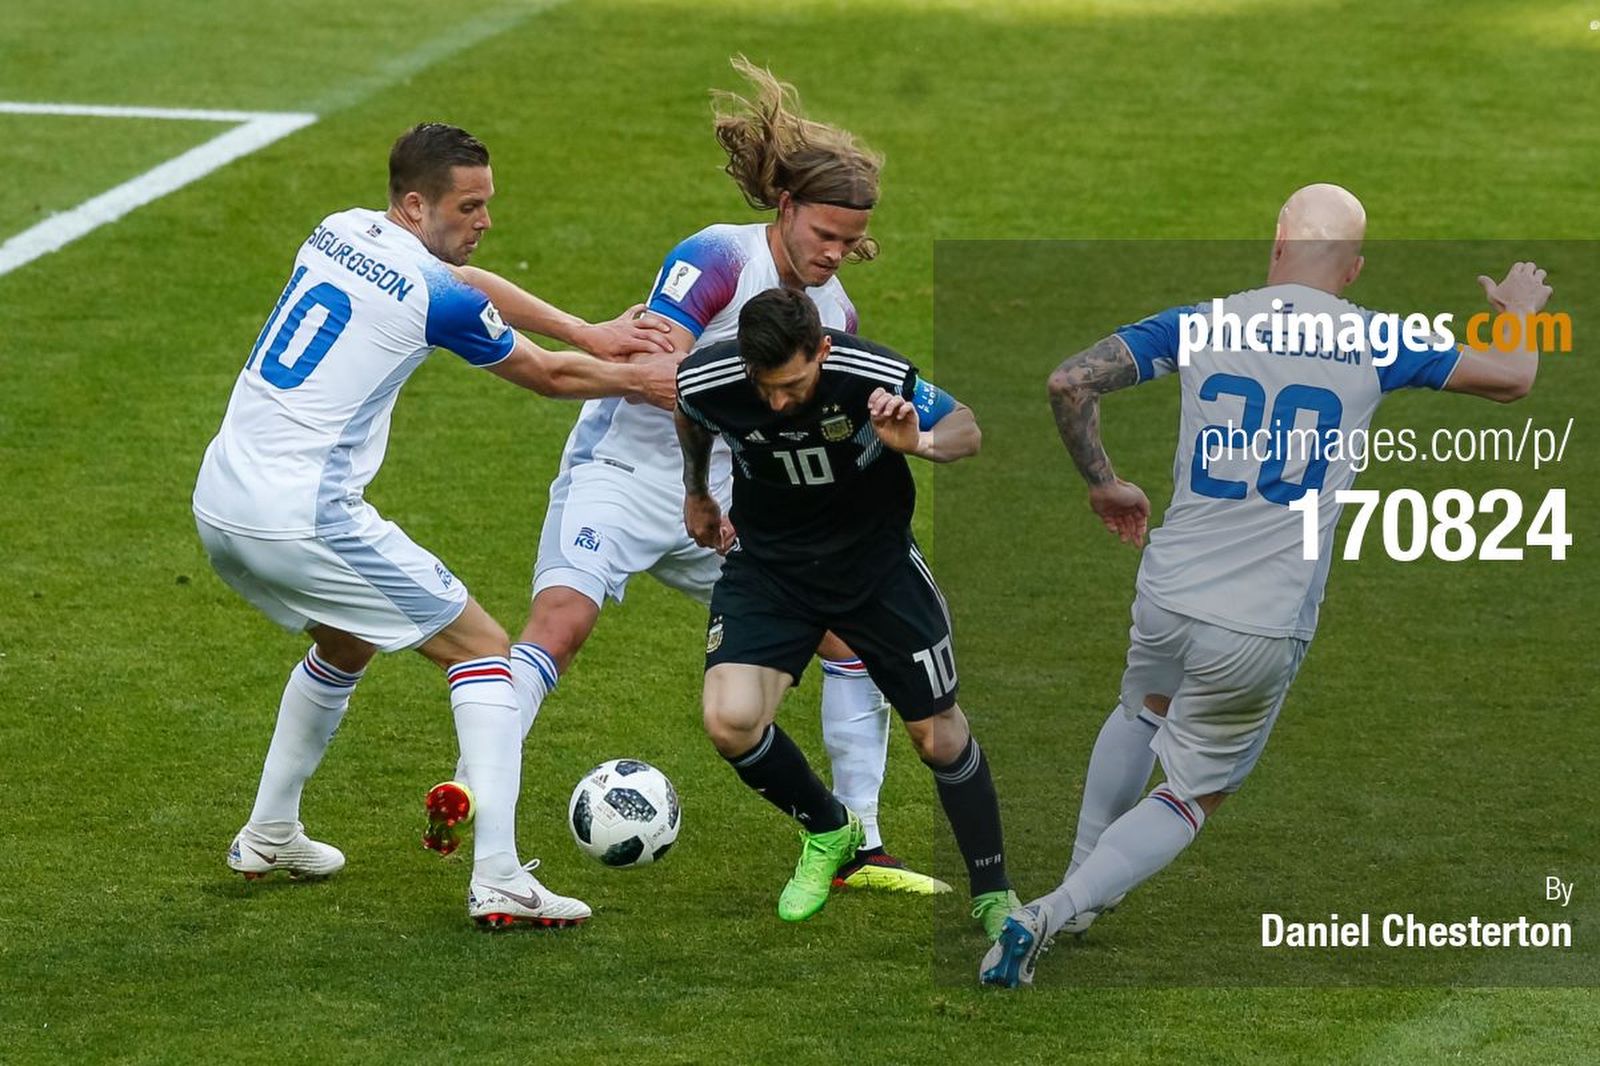 Lionel Messi is surrounded by Icelandics